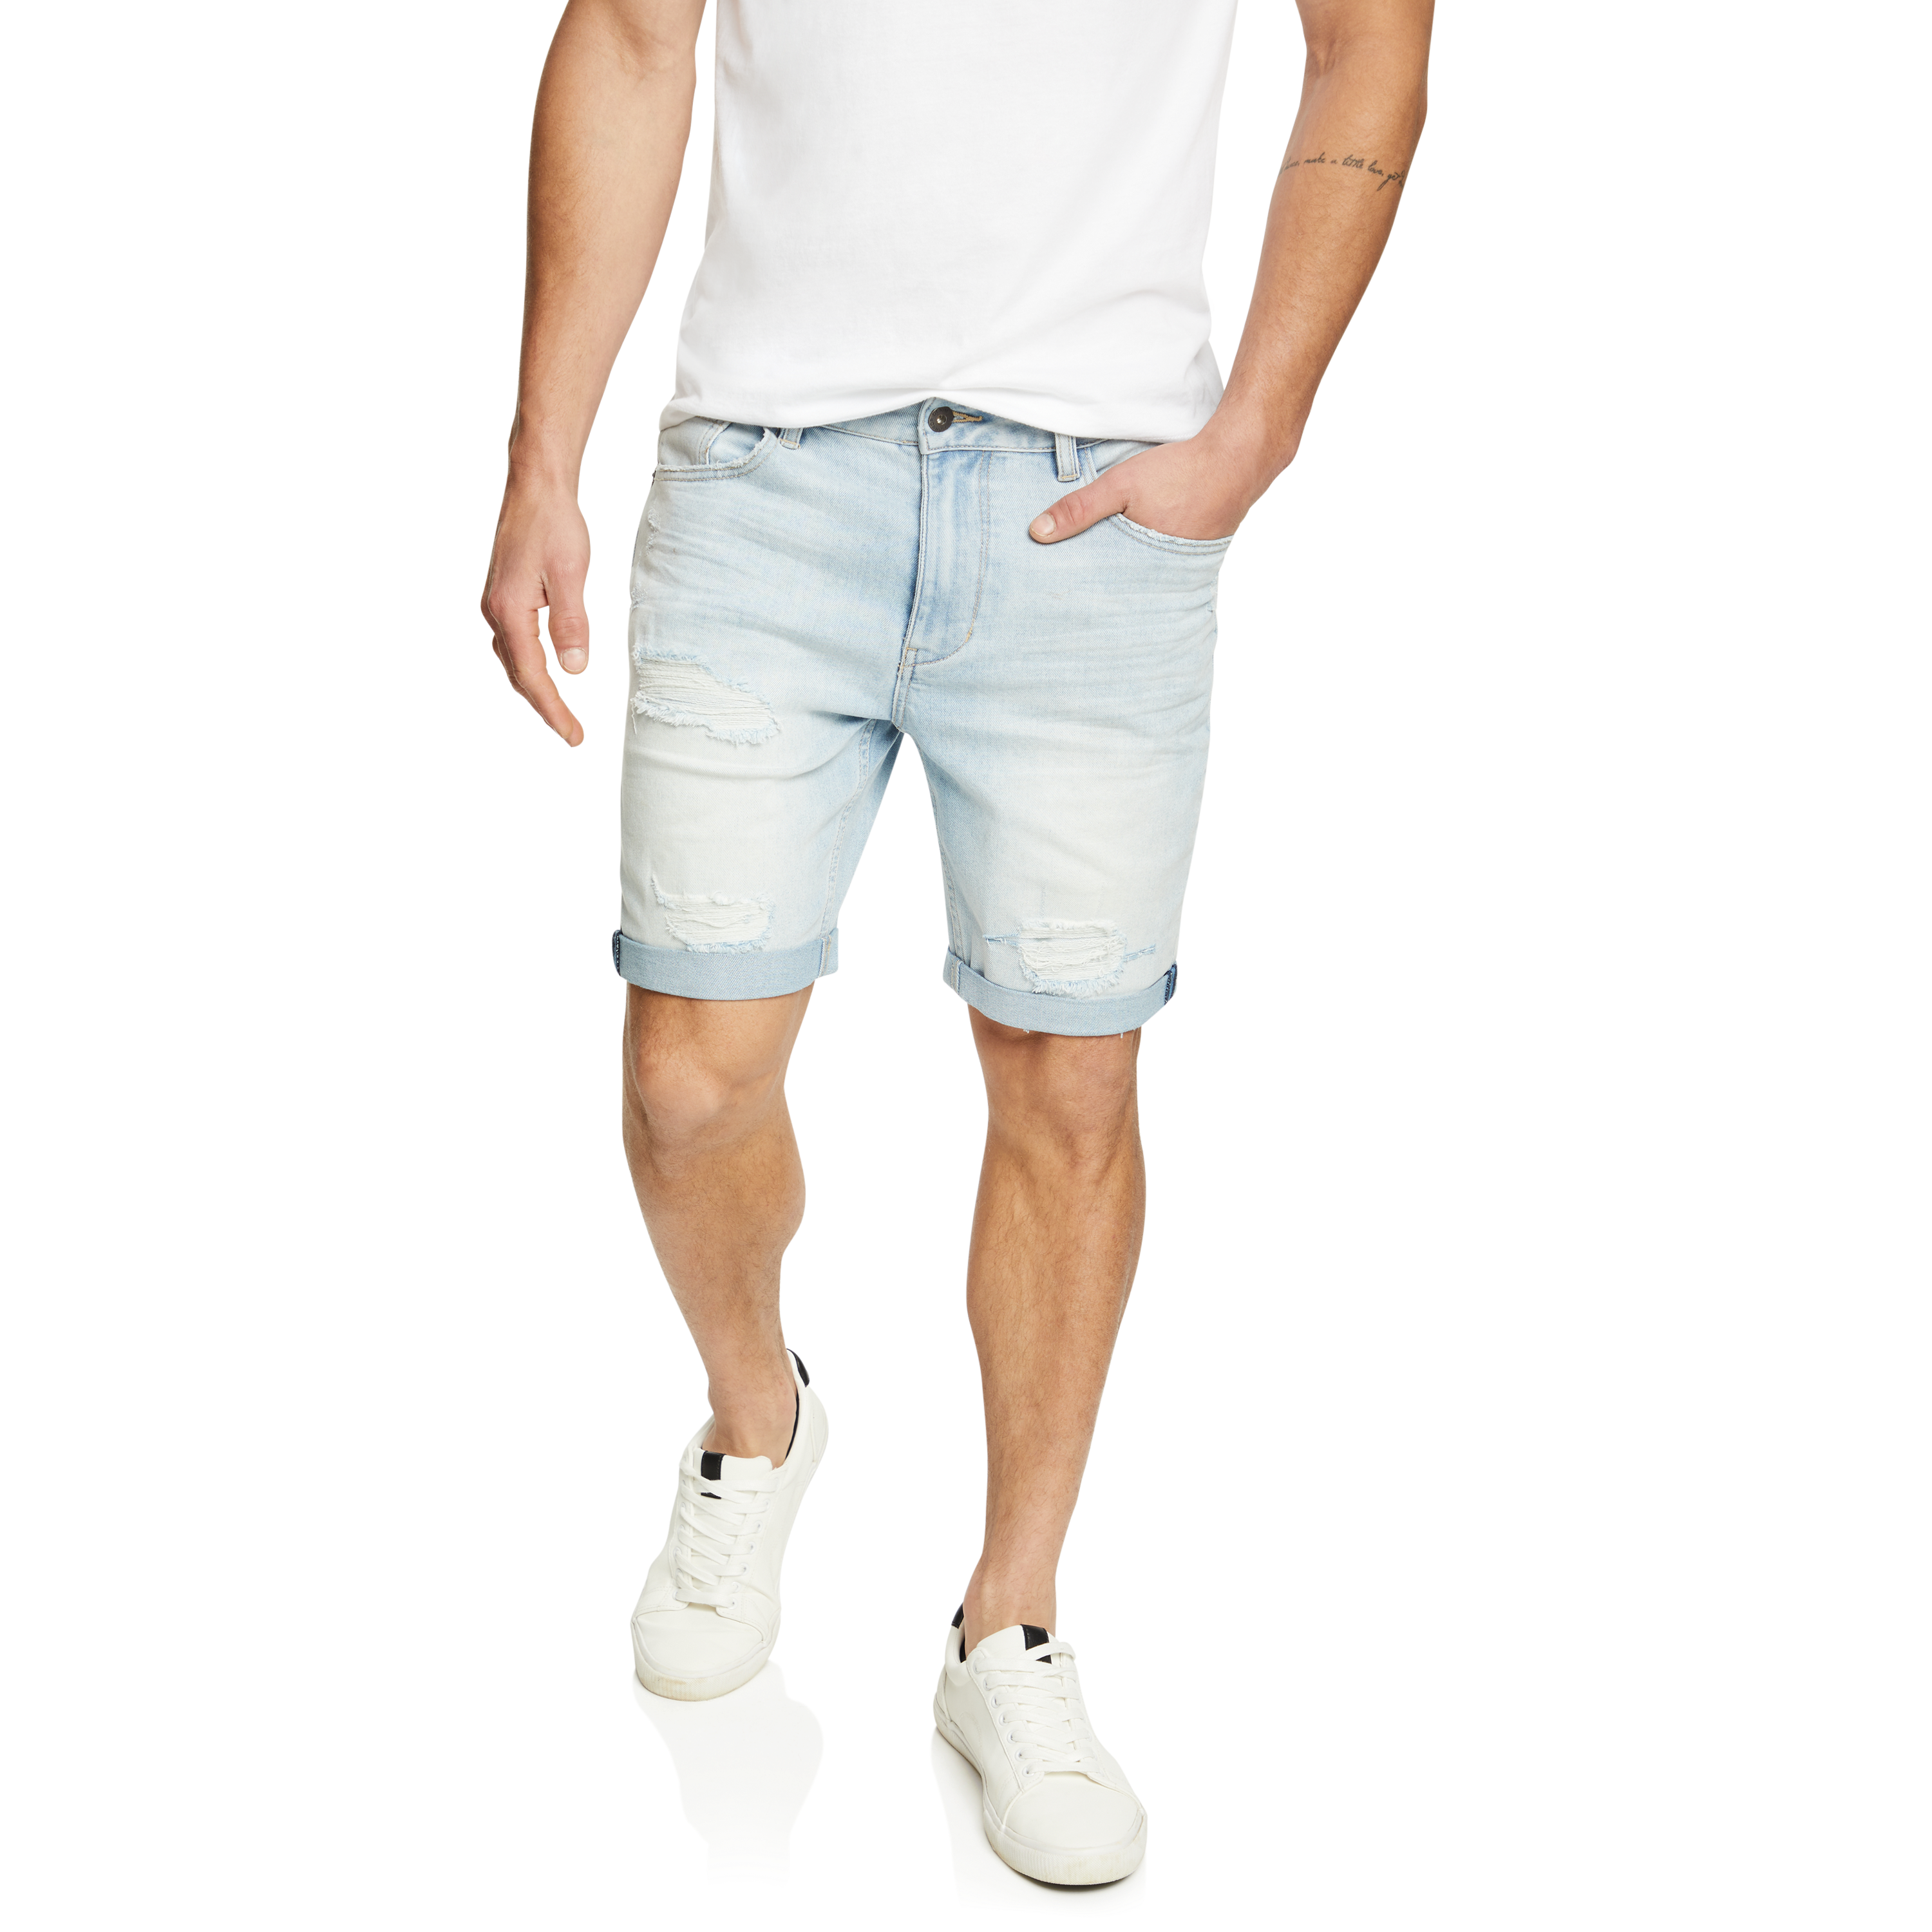 Short Jeans Free PNG